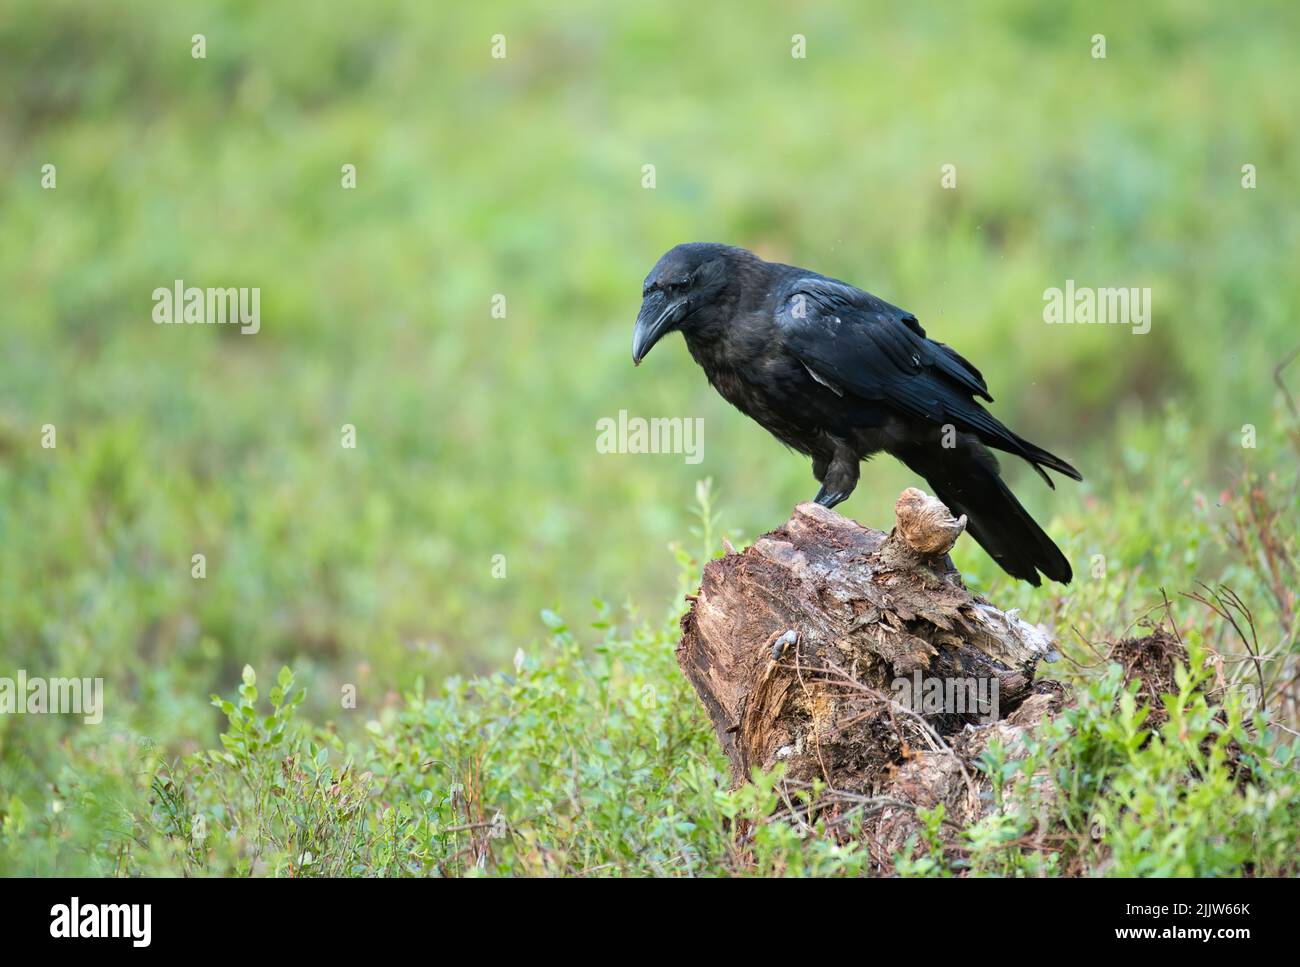 Common raven (Corvus corax) photographed in the Taiga forest of Finland. Stock Photo